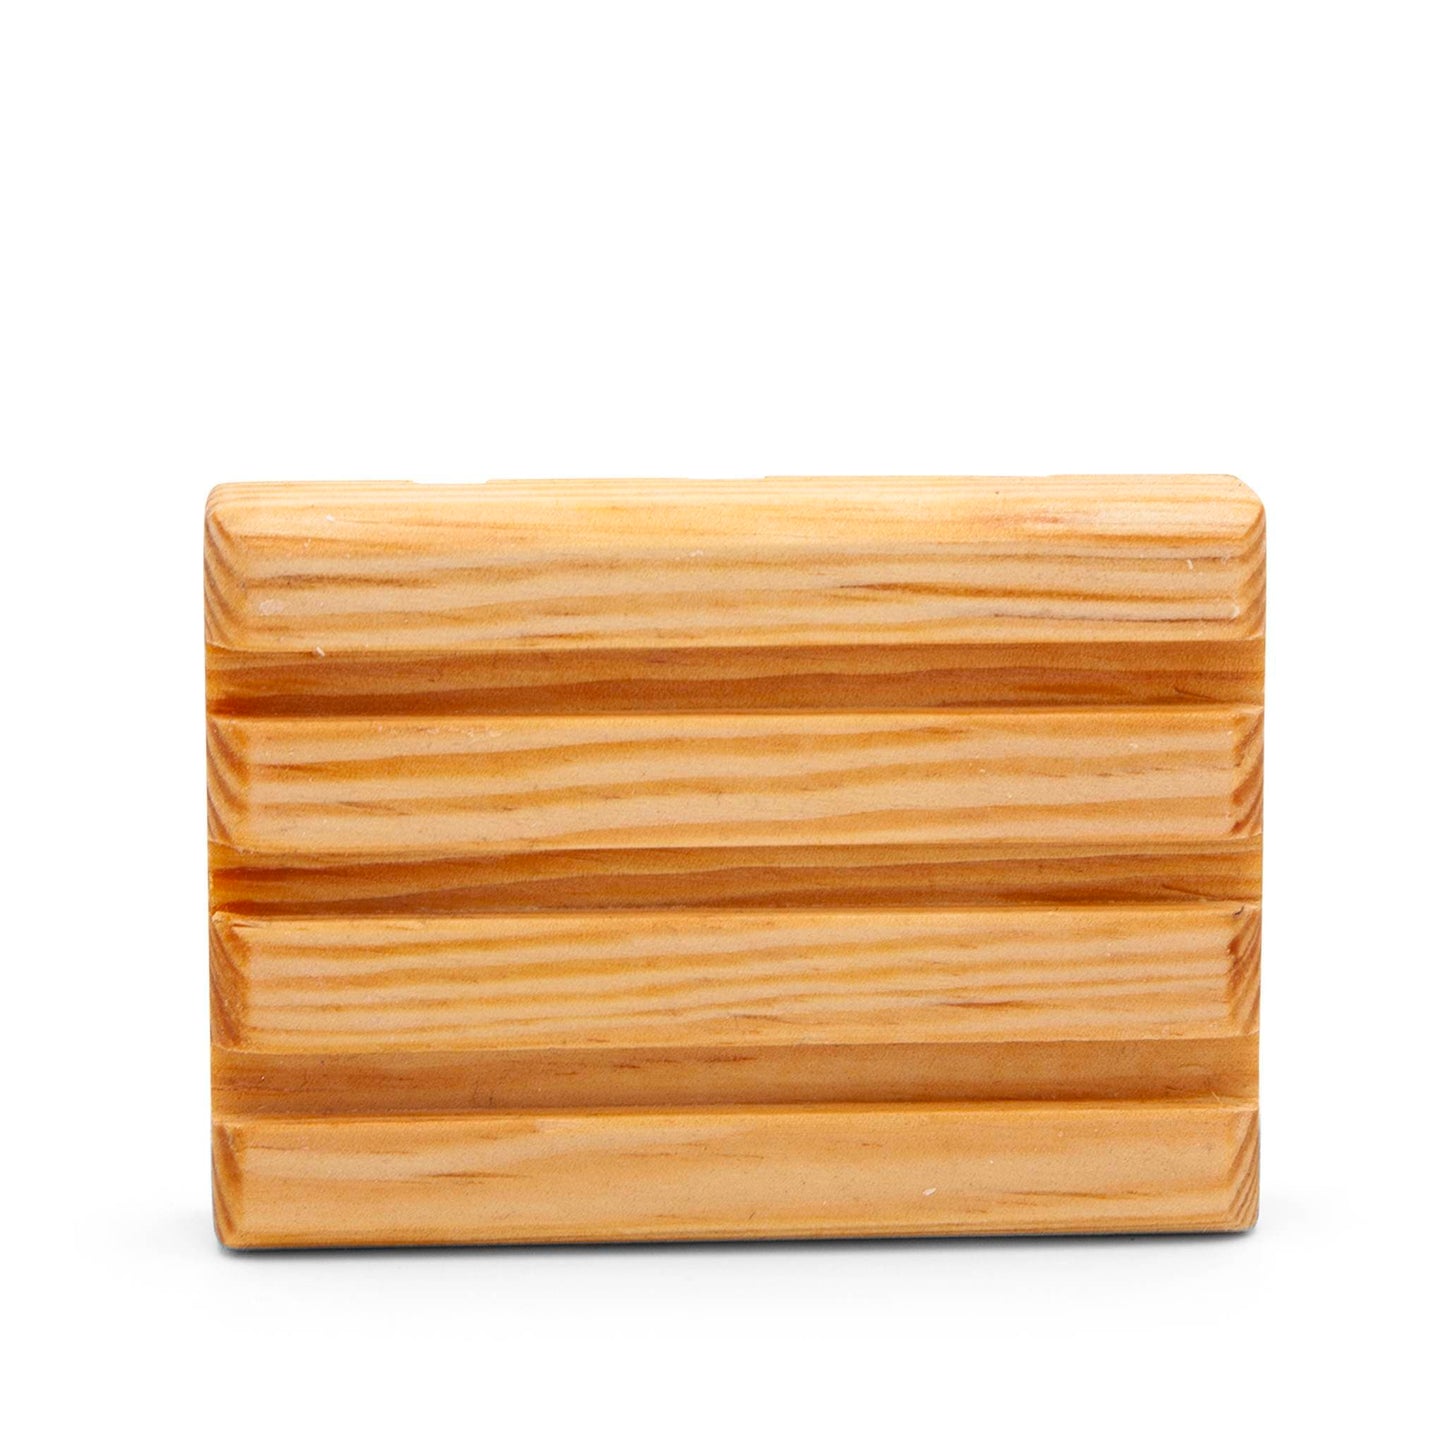 Faerly Wooden Soap Dish